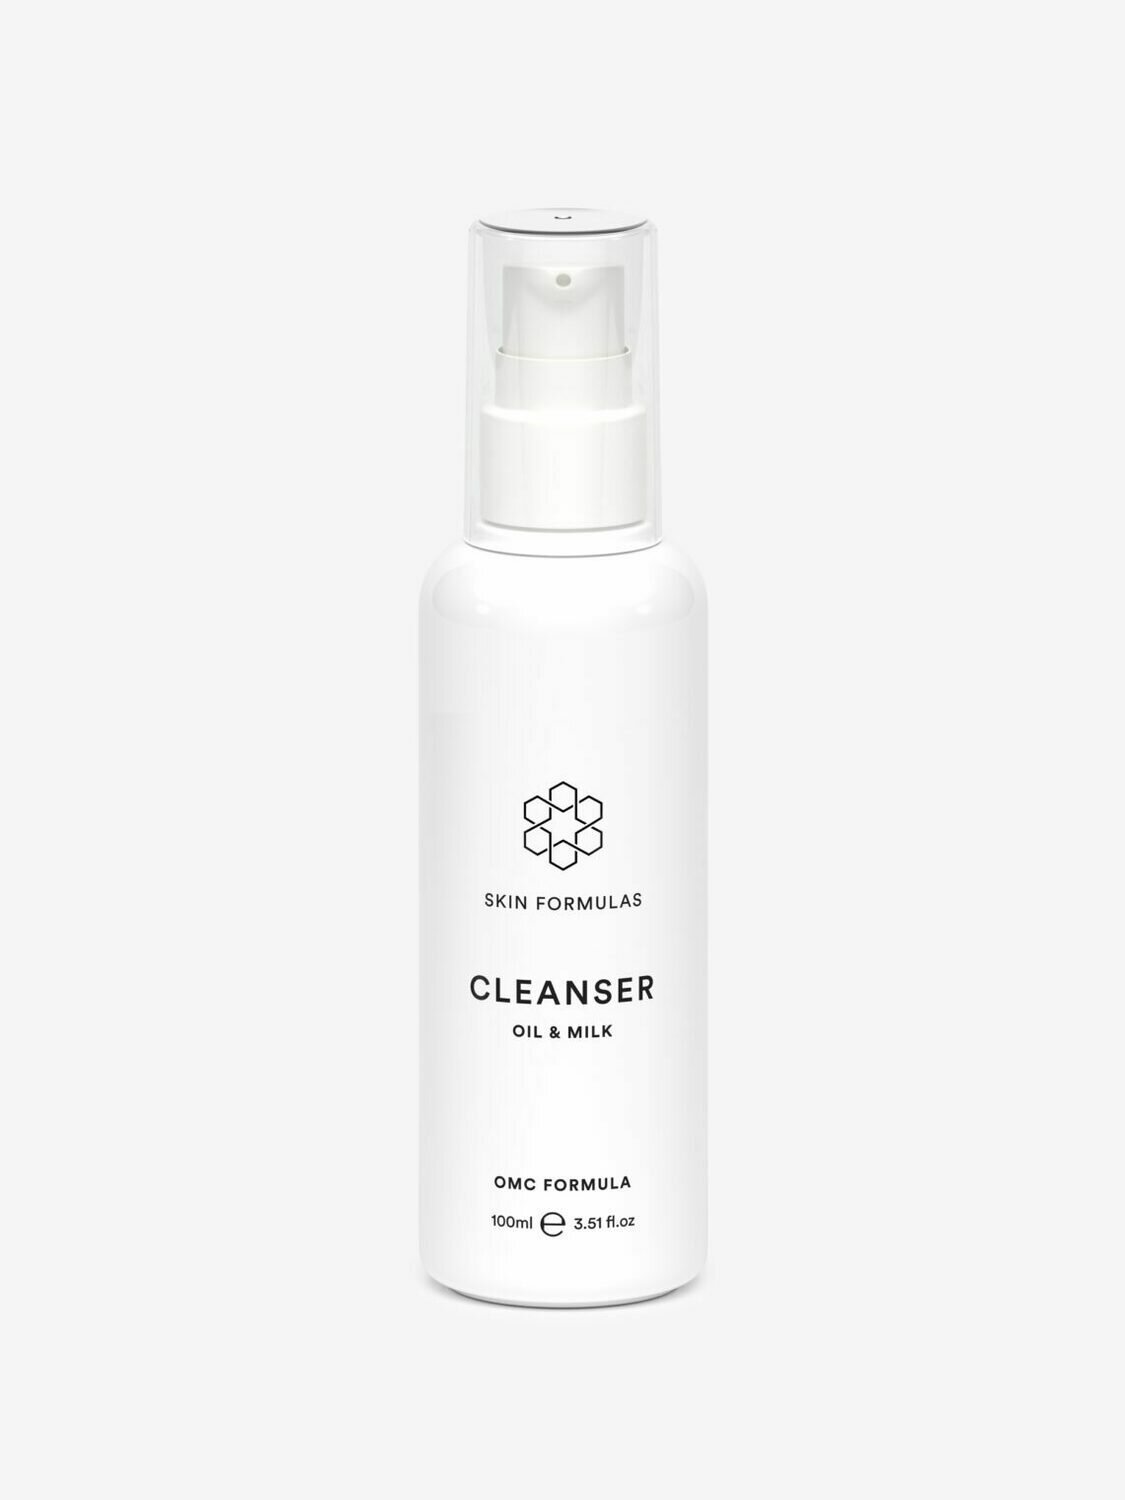 CLEANSER